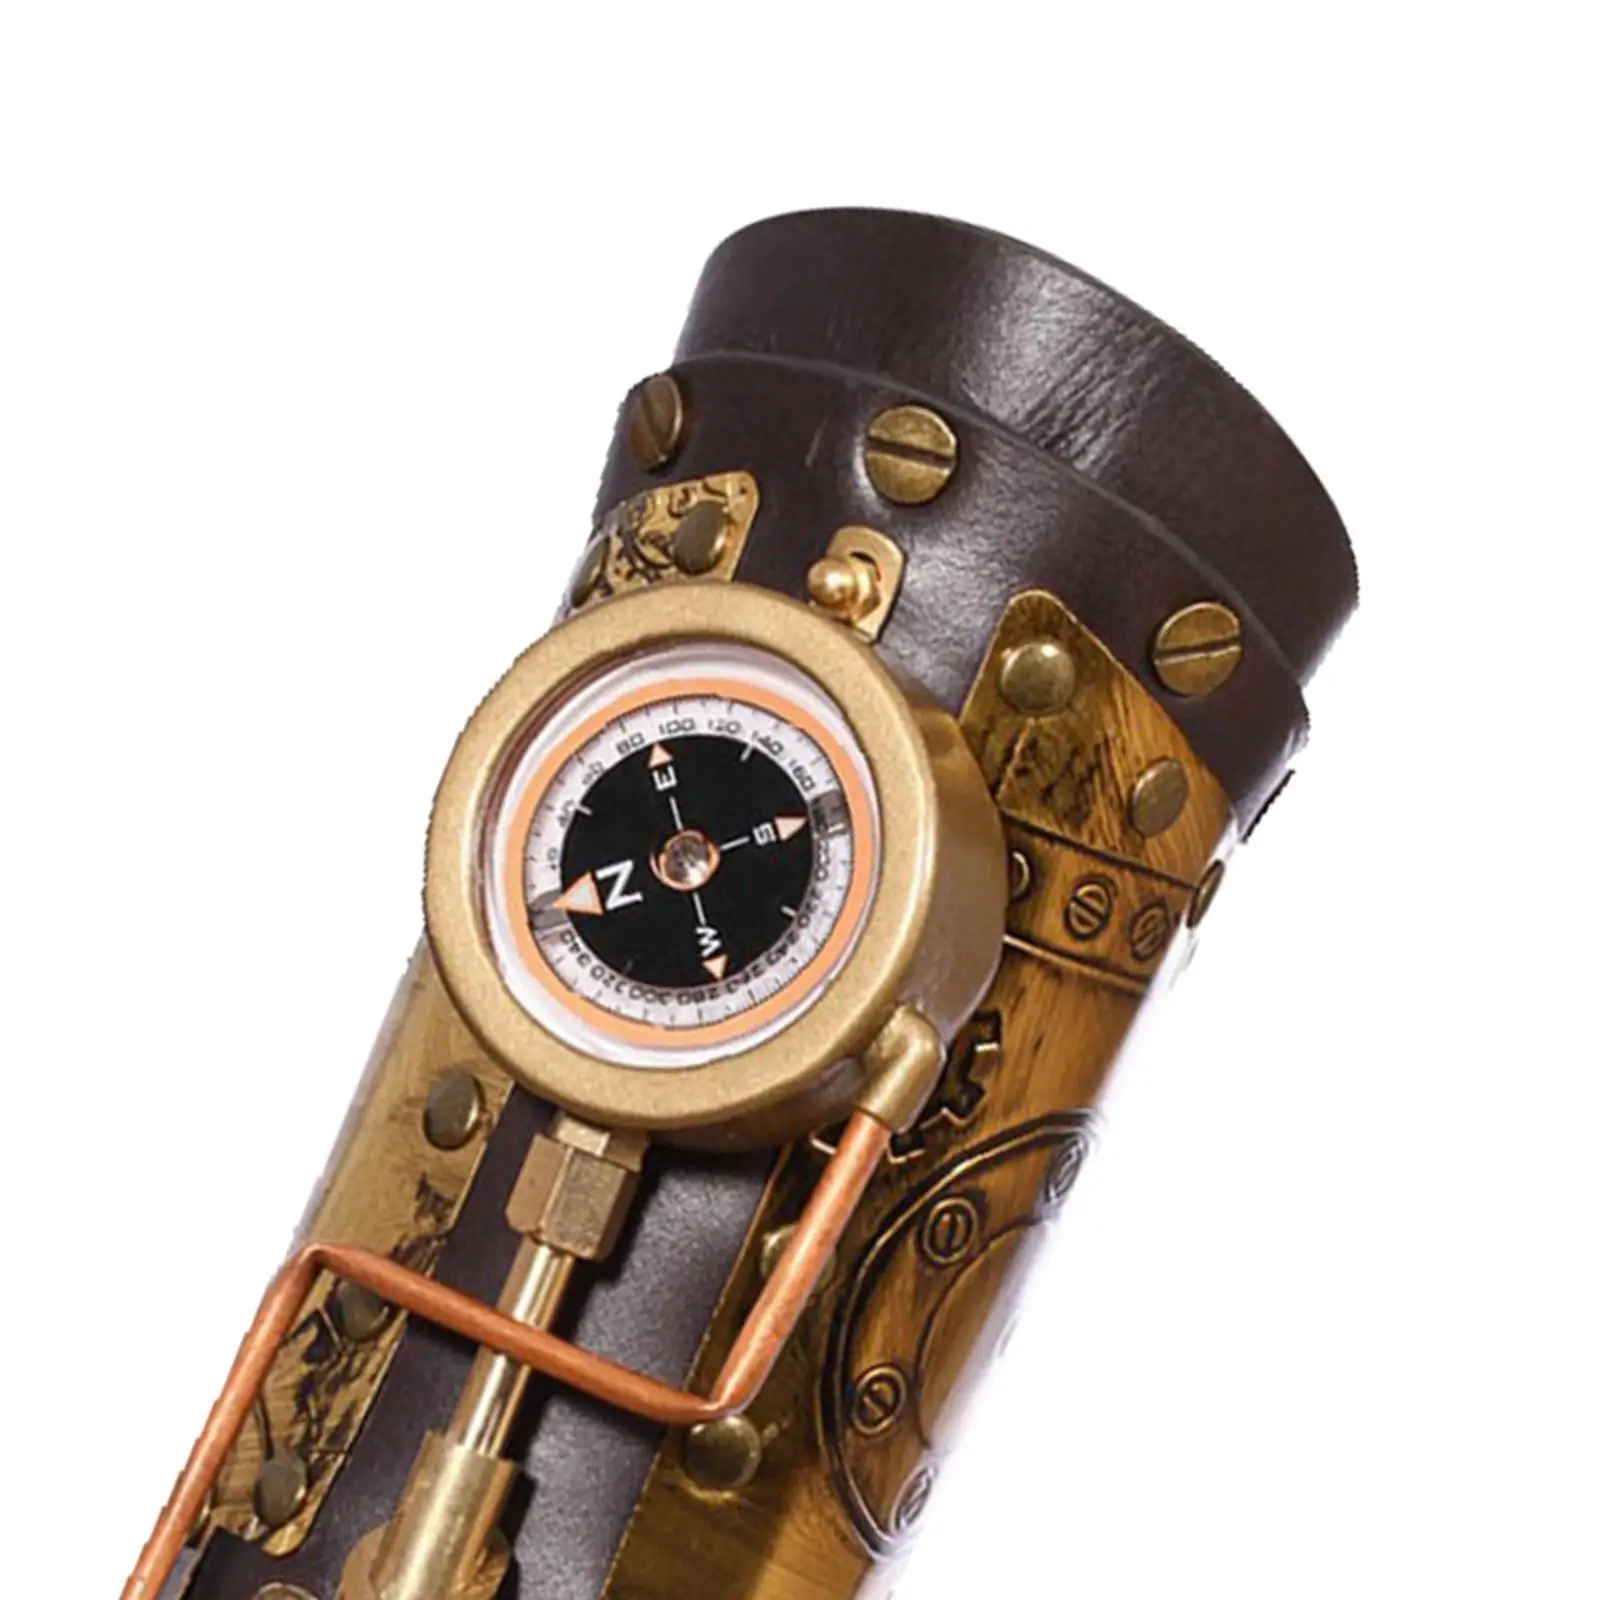 Steampunk Arm Sleeve Wrist Guard with Compass Decorative Arm Bracer Cuff for Cosplay Carnival Theme Party Performance Wedding